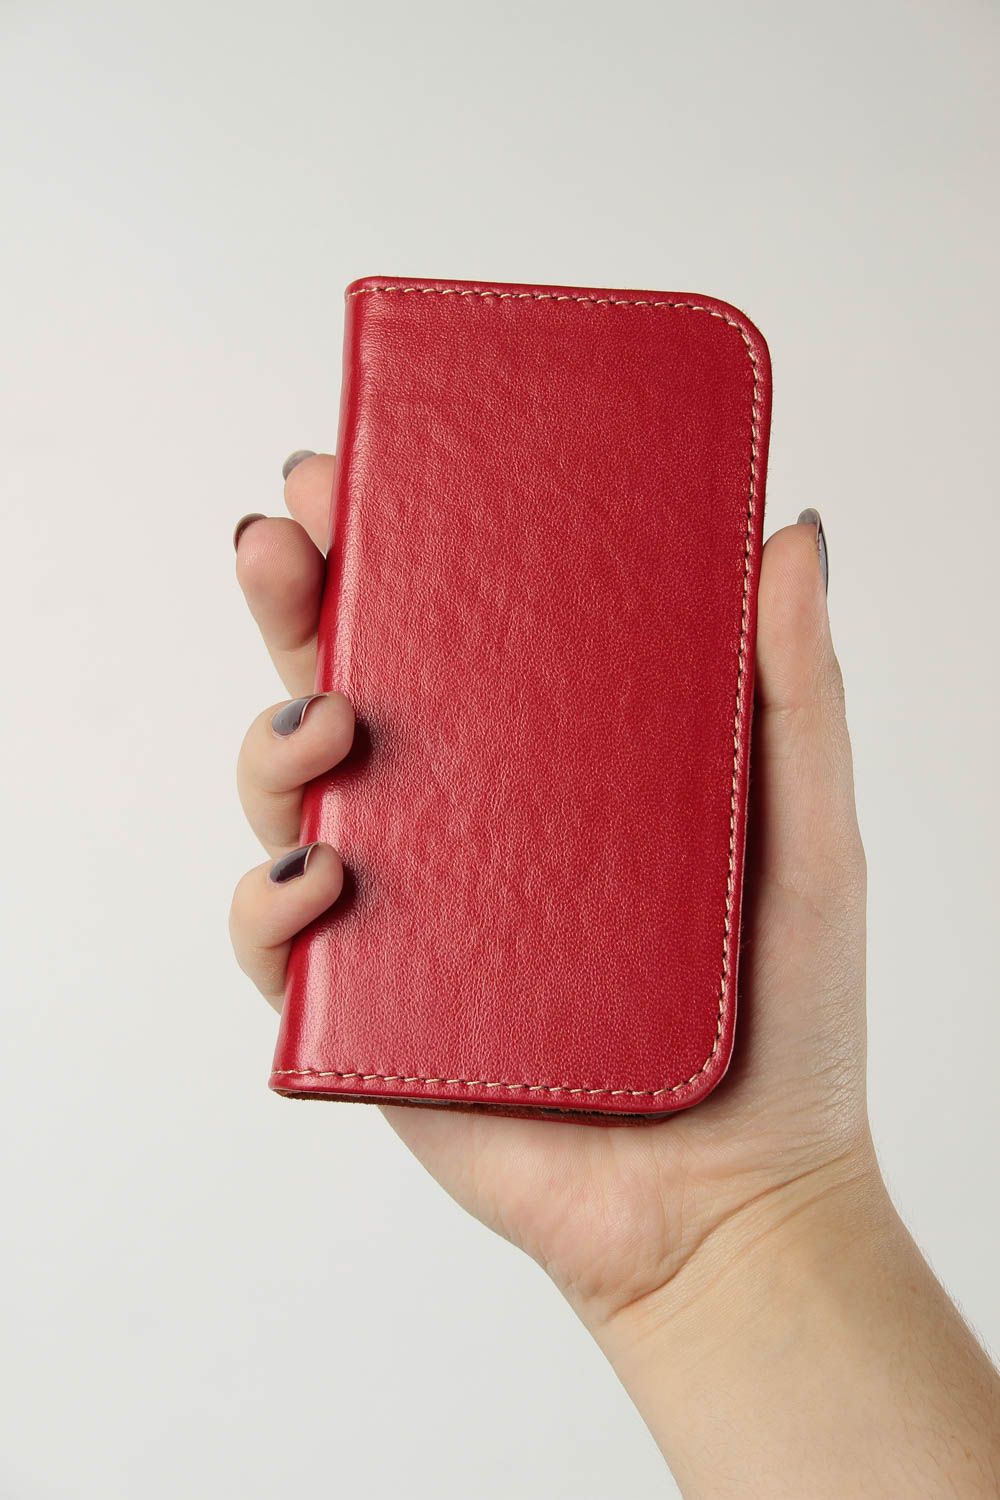 Cell Phone Holder | Genuine Leather Phone Holder Wristlet Wallet | Phone Case Wallet | Unique Gift for Her | Phone Accessories